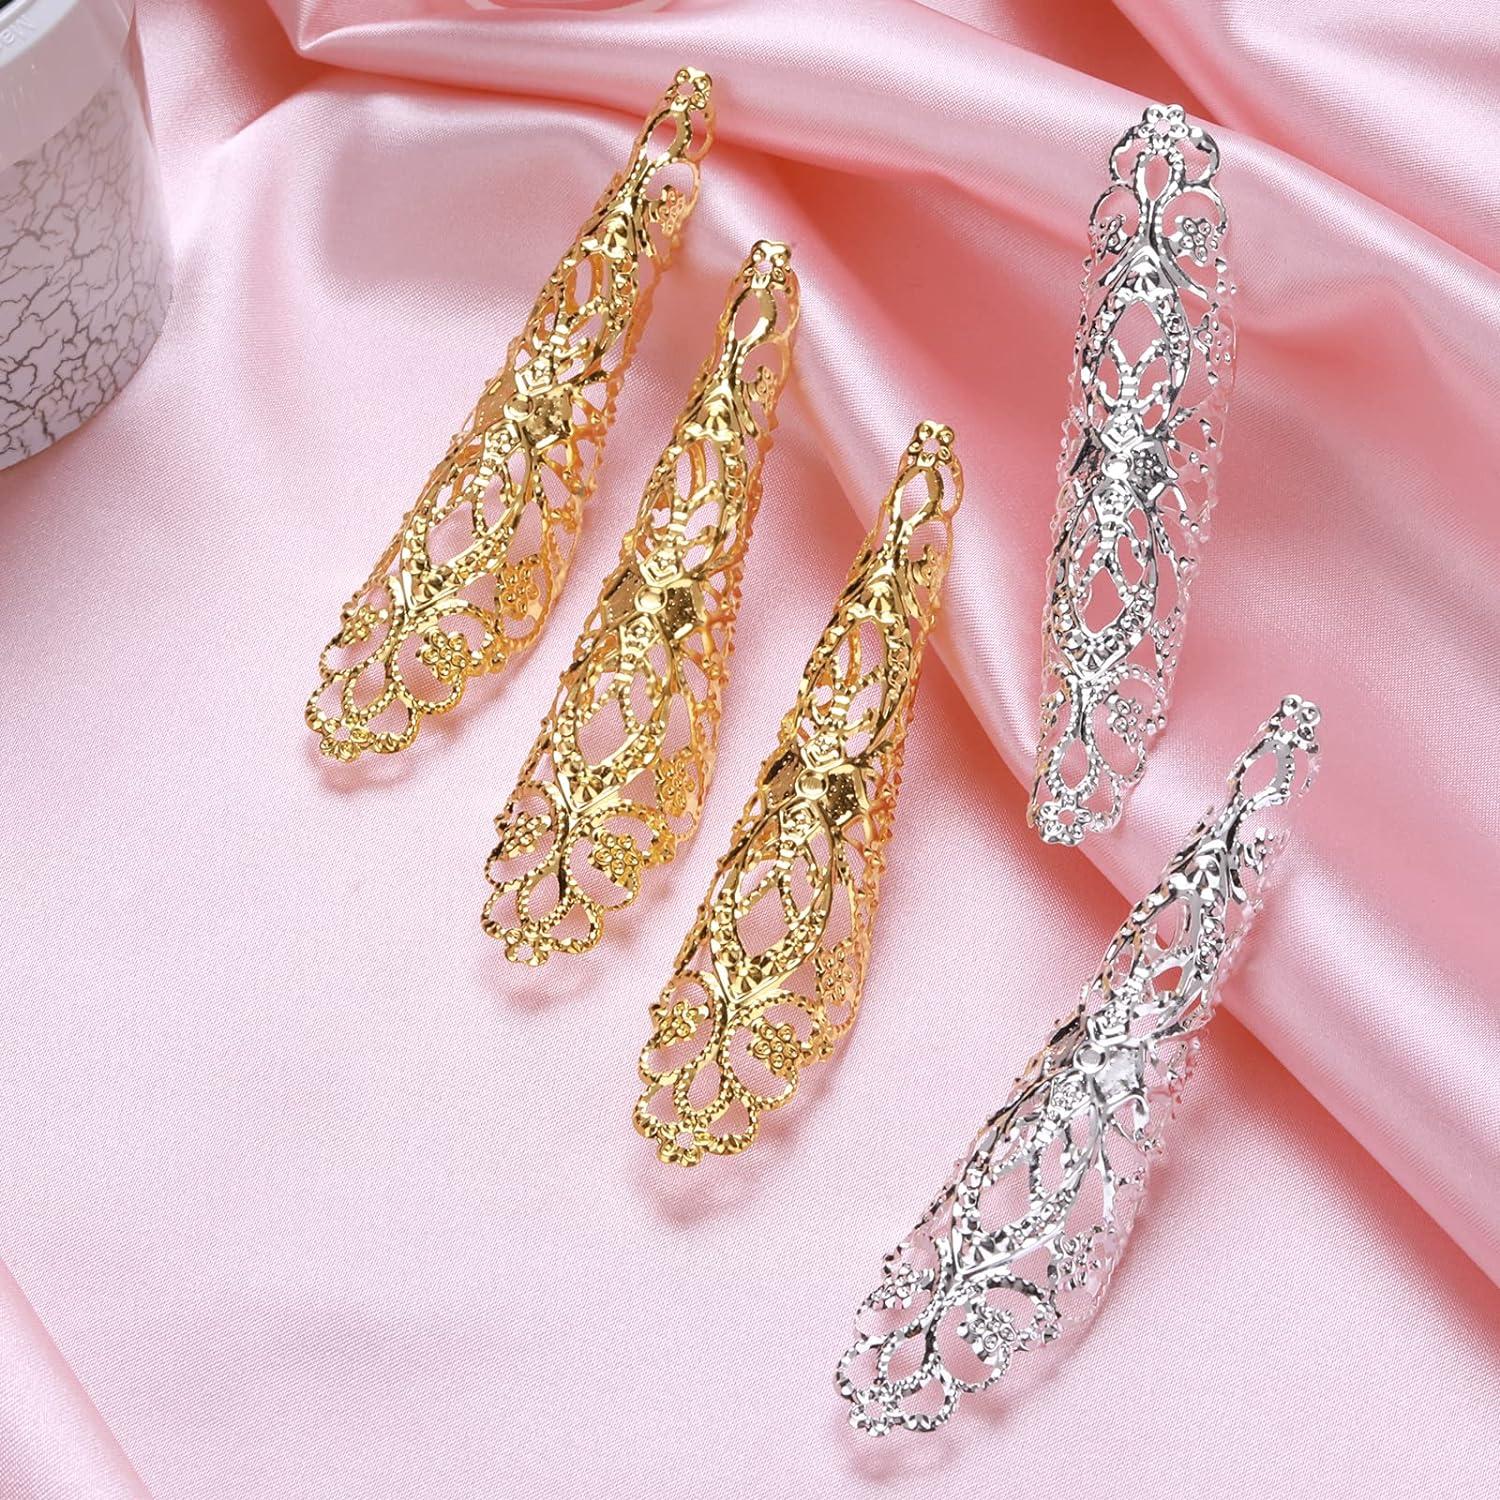 Leelosp 20 Packs halloween Finger Nail Claw Rings Ancient Queen Fingernail  Claw Metal Finger Knuckle Claw for Halloween Women Cosplay Costume Drama